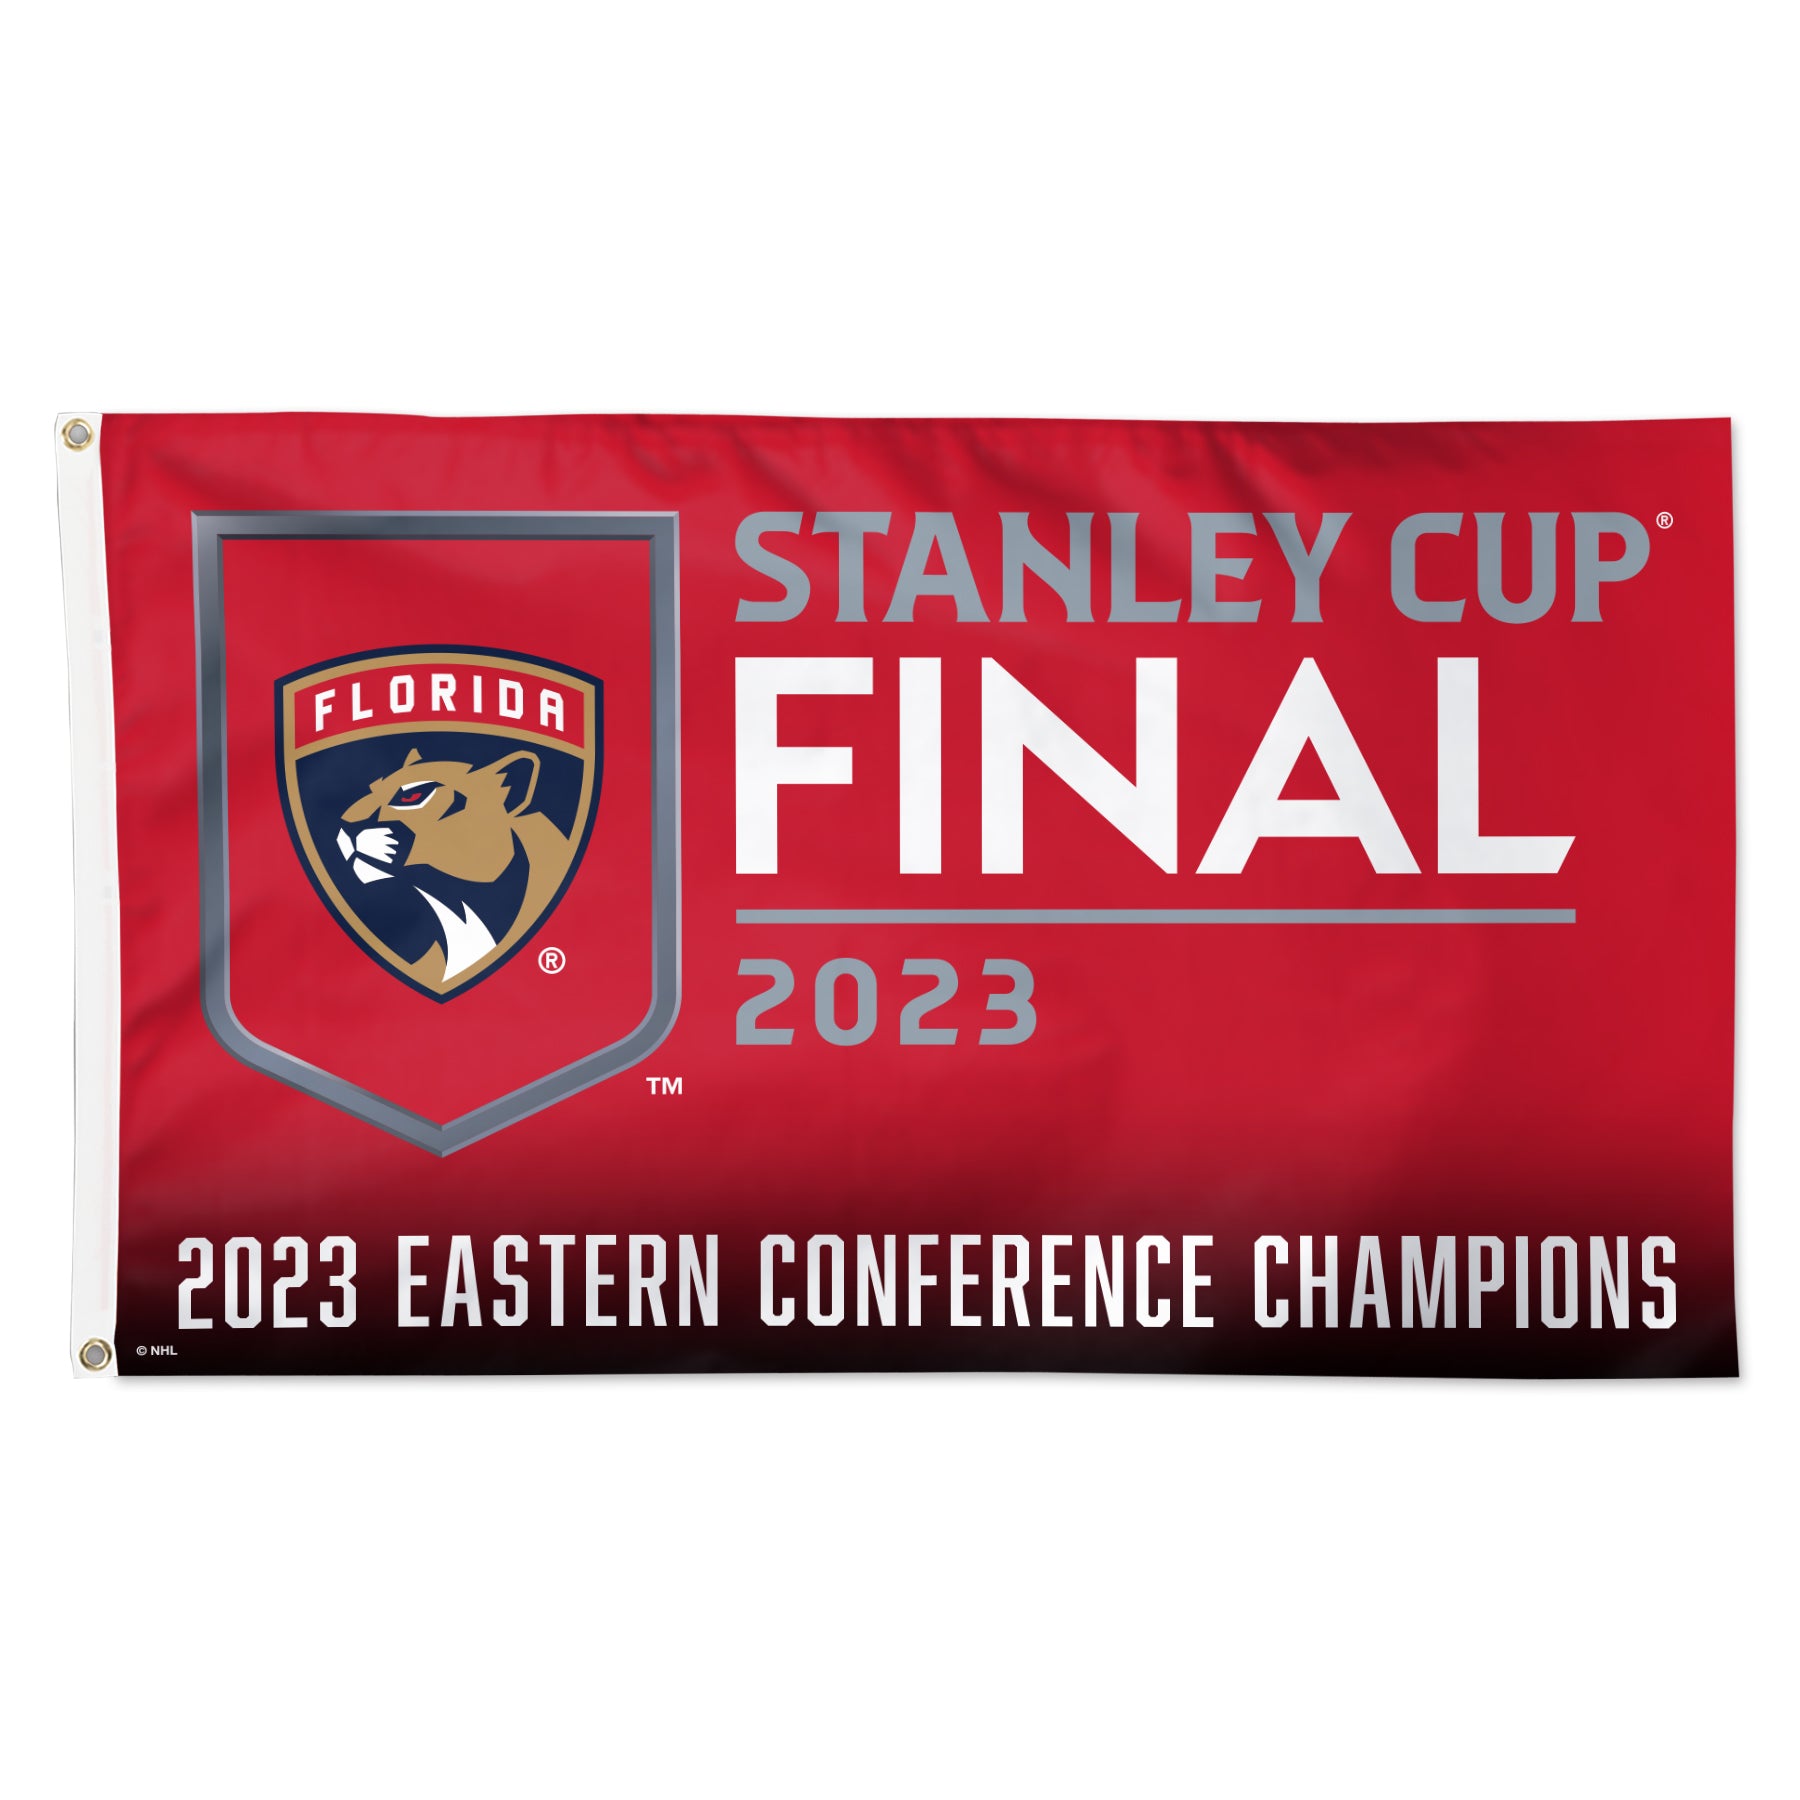 When Is the 2023 Stanley Cup Final?